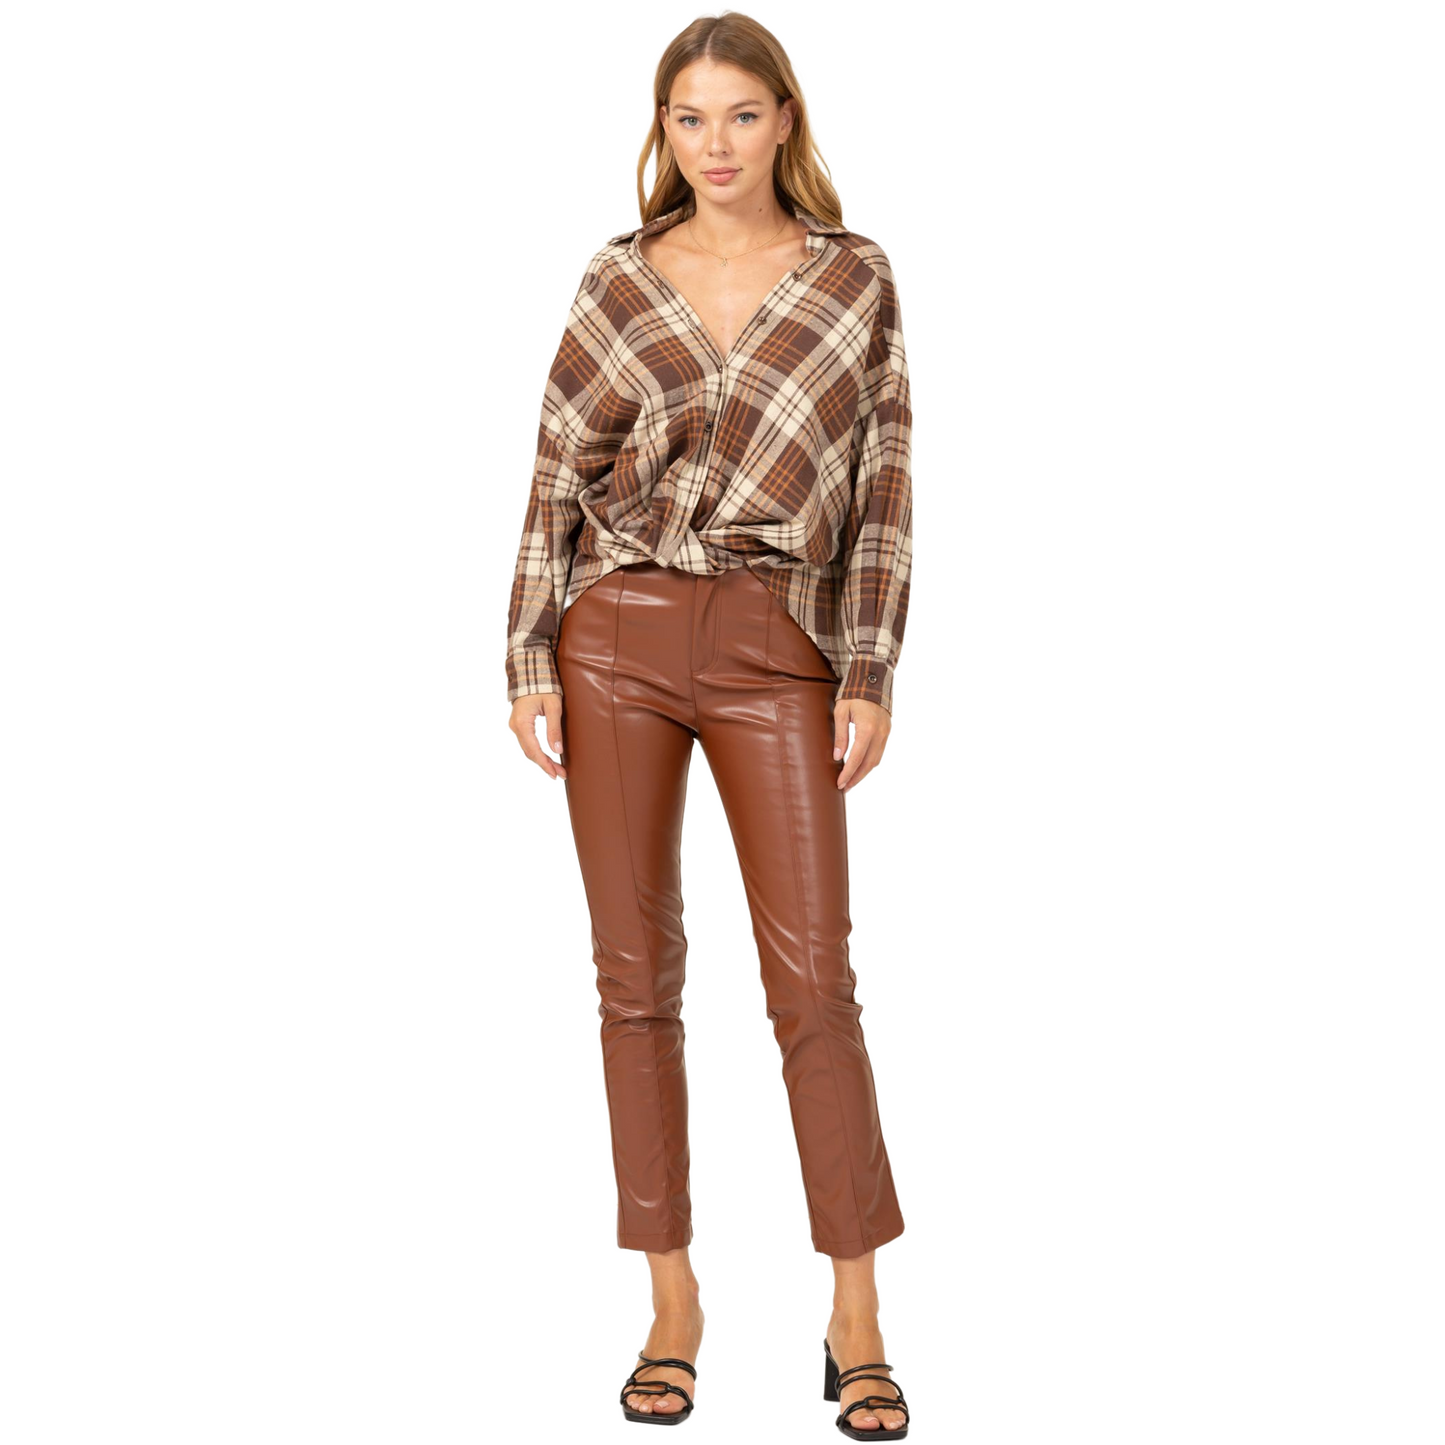 Fashion on Earth P-Leather Pants Brown or Khaki (S-L)